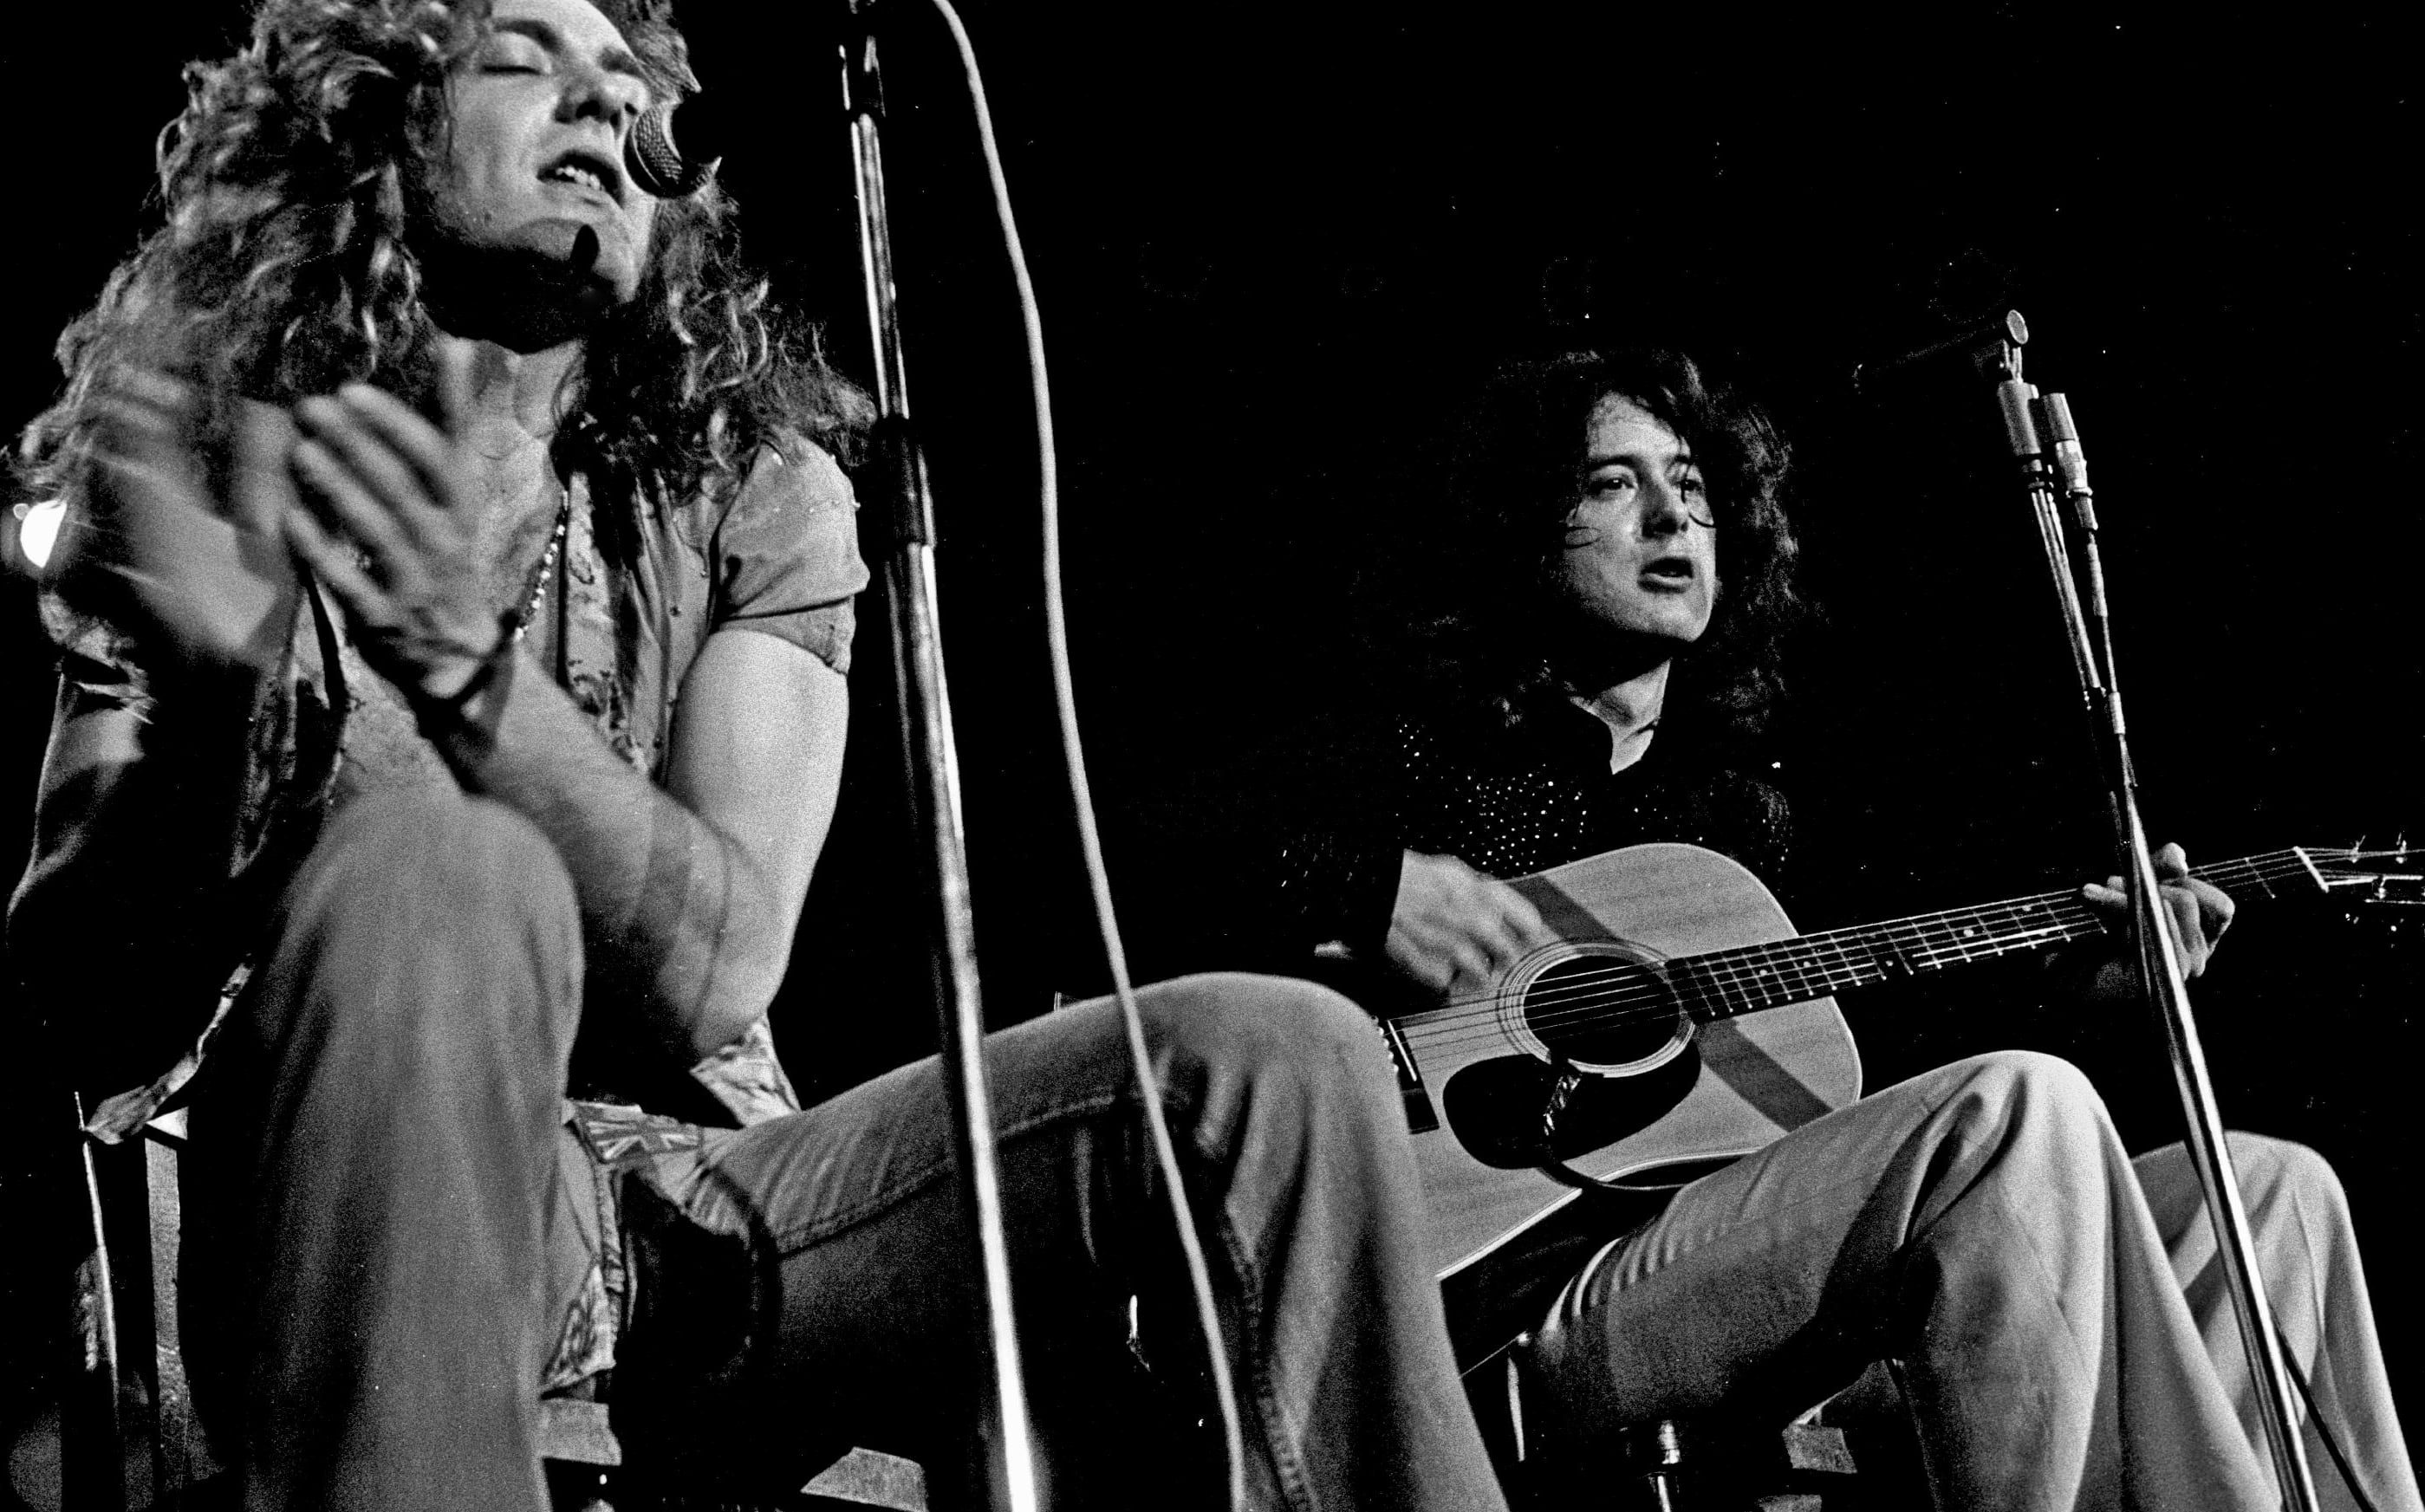 Fifty years Zeppelin's Stairway to Heaven — the epic all epics are measured against RNZ News